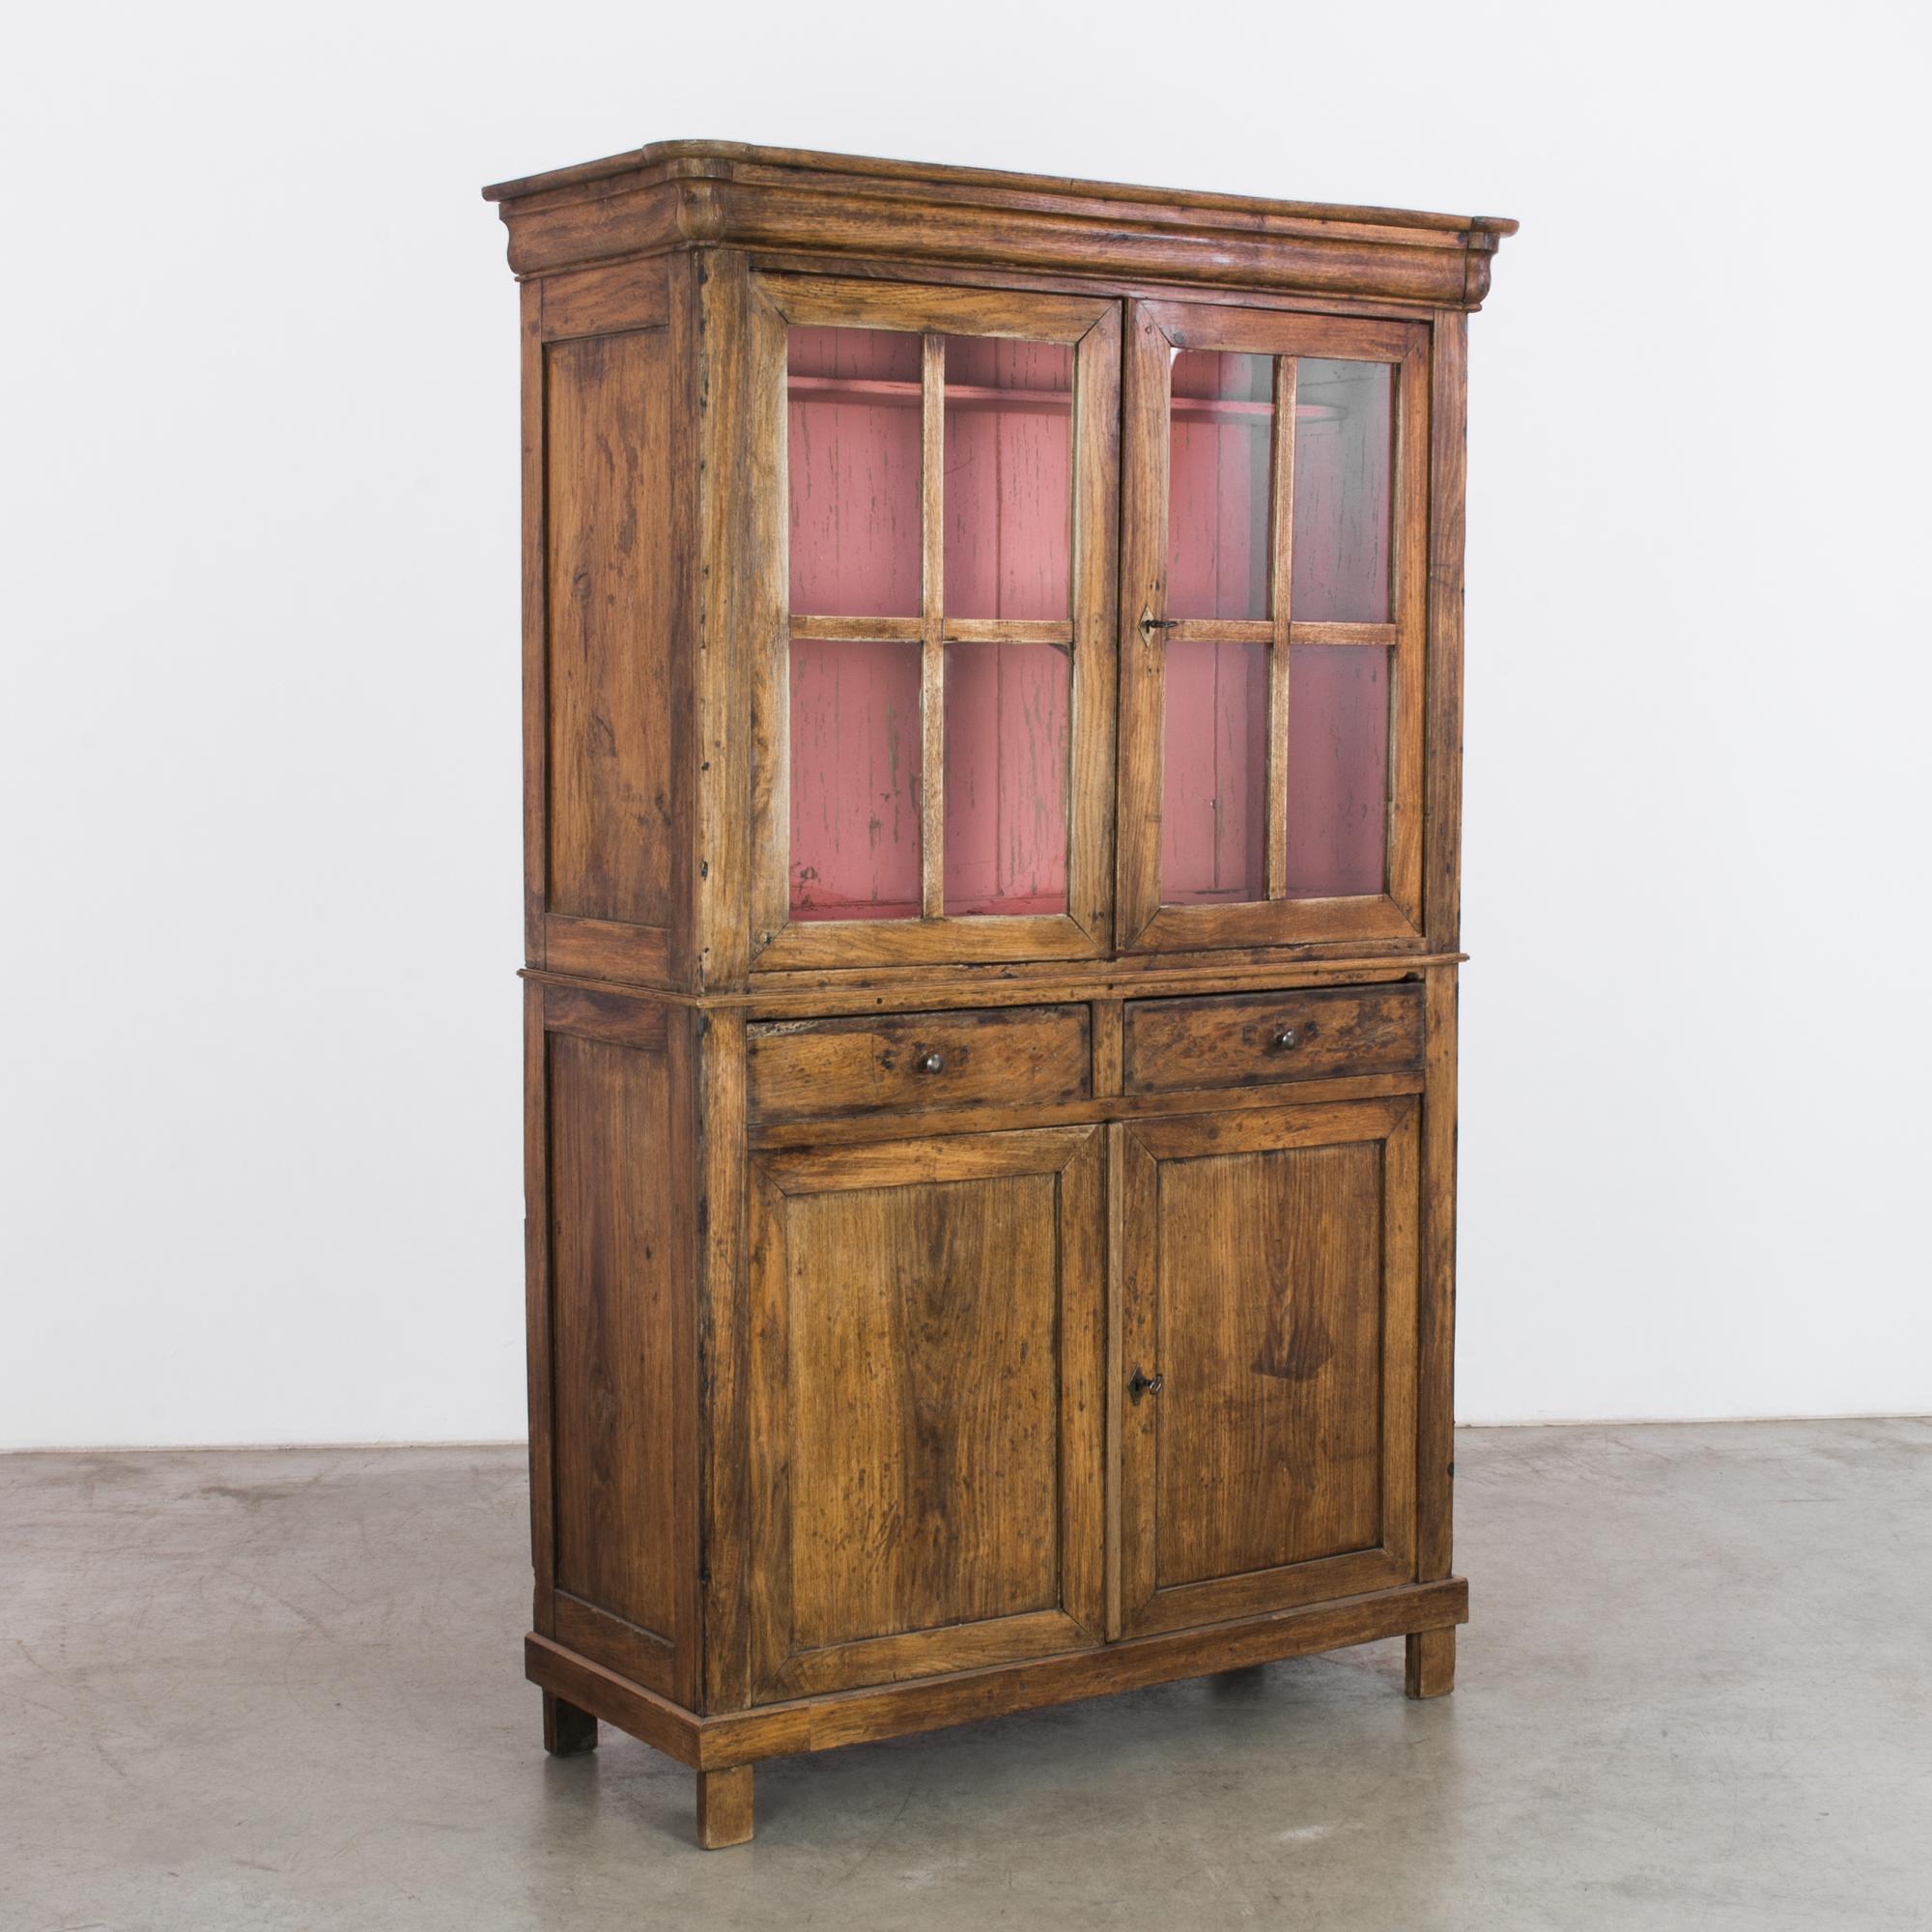 1880s French Country Oak Vitrine with Rose Pink Interior 1